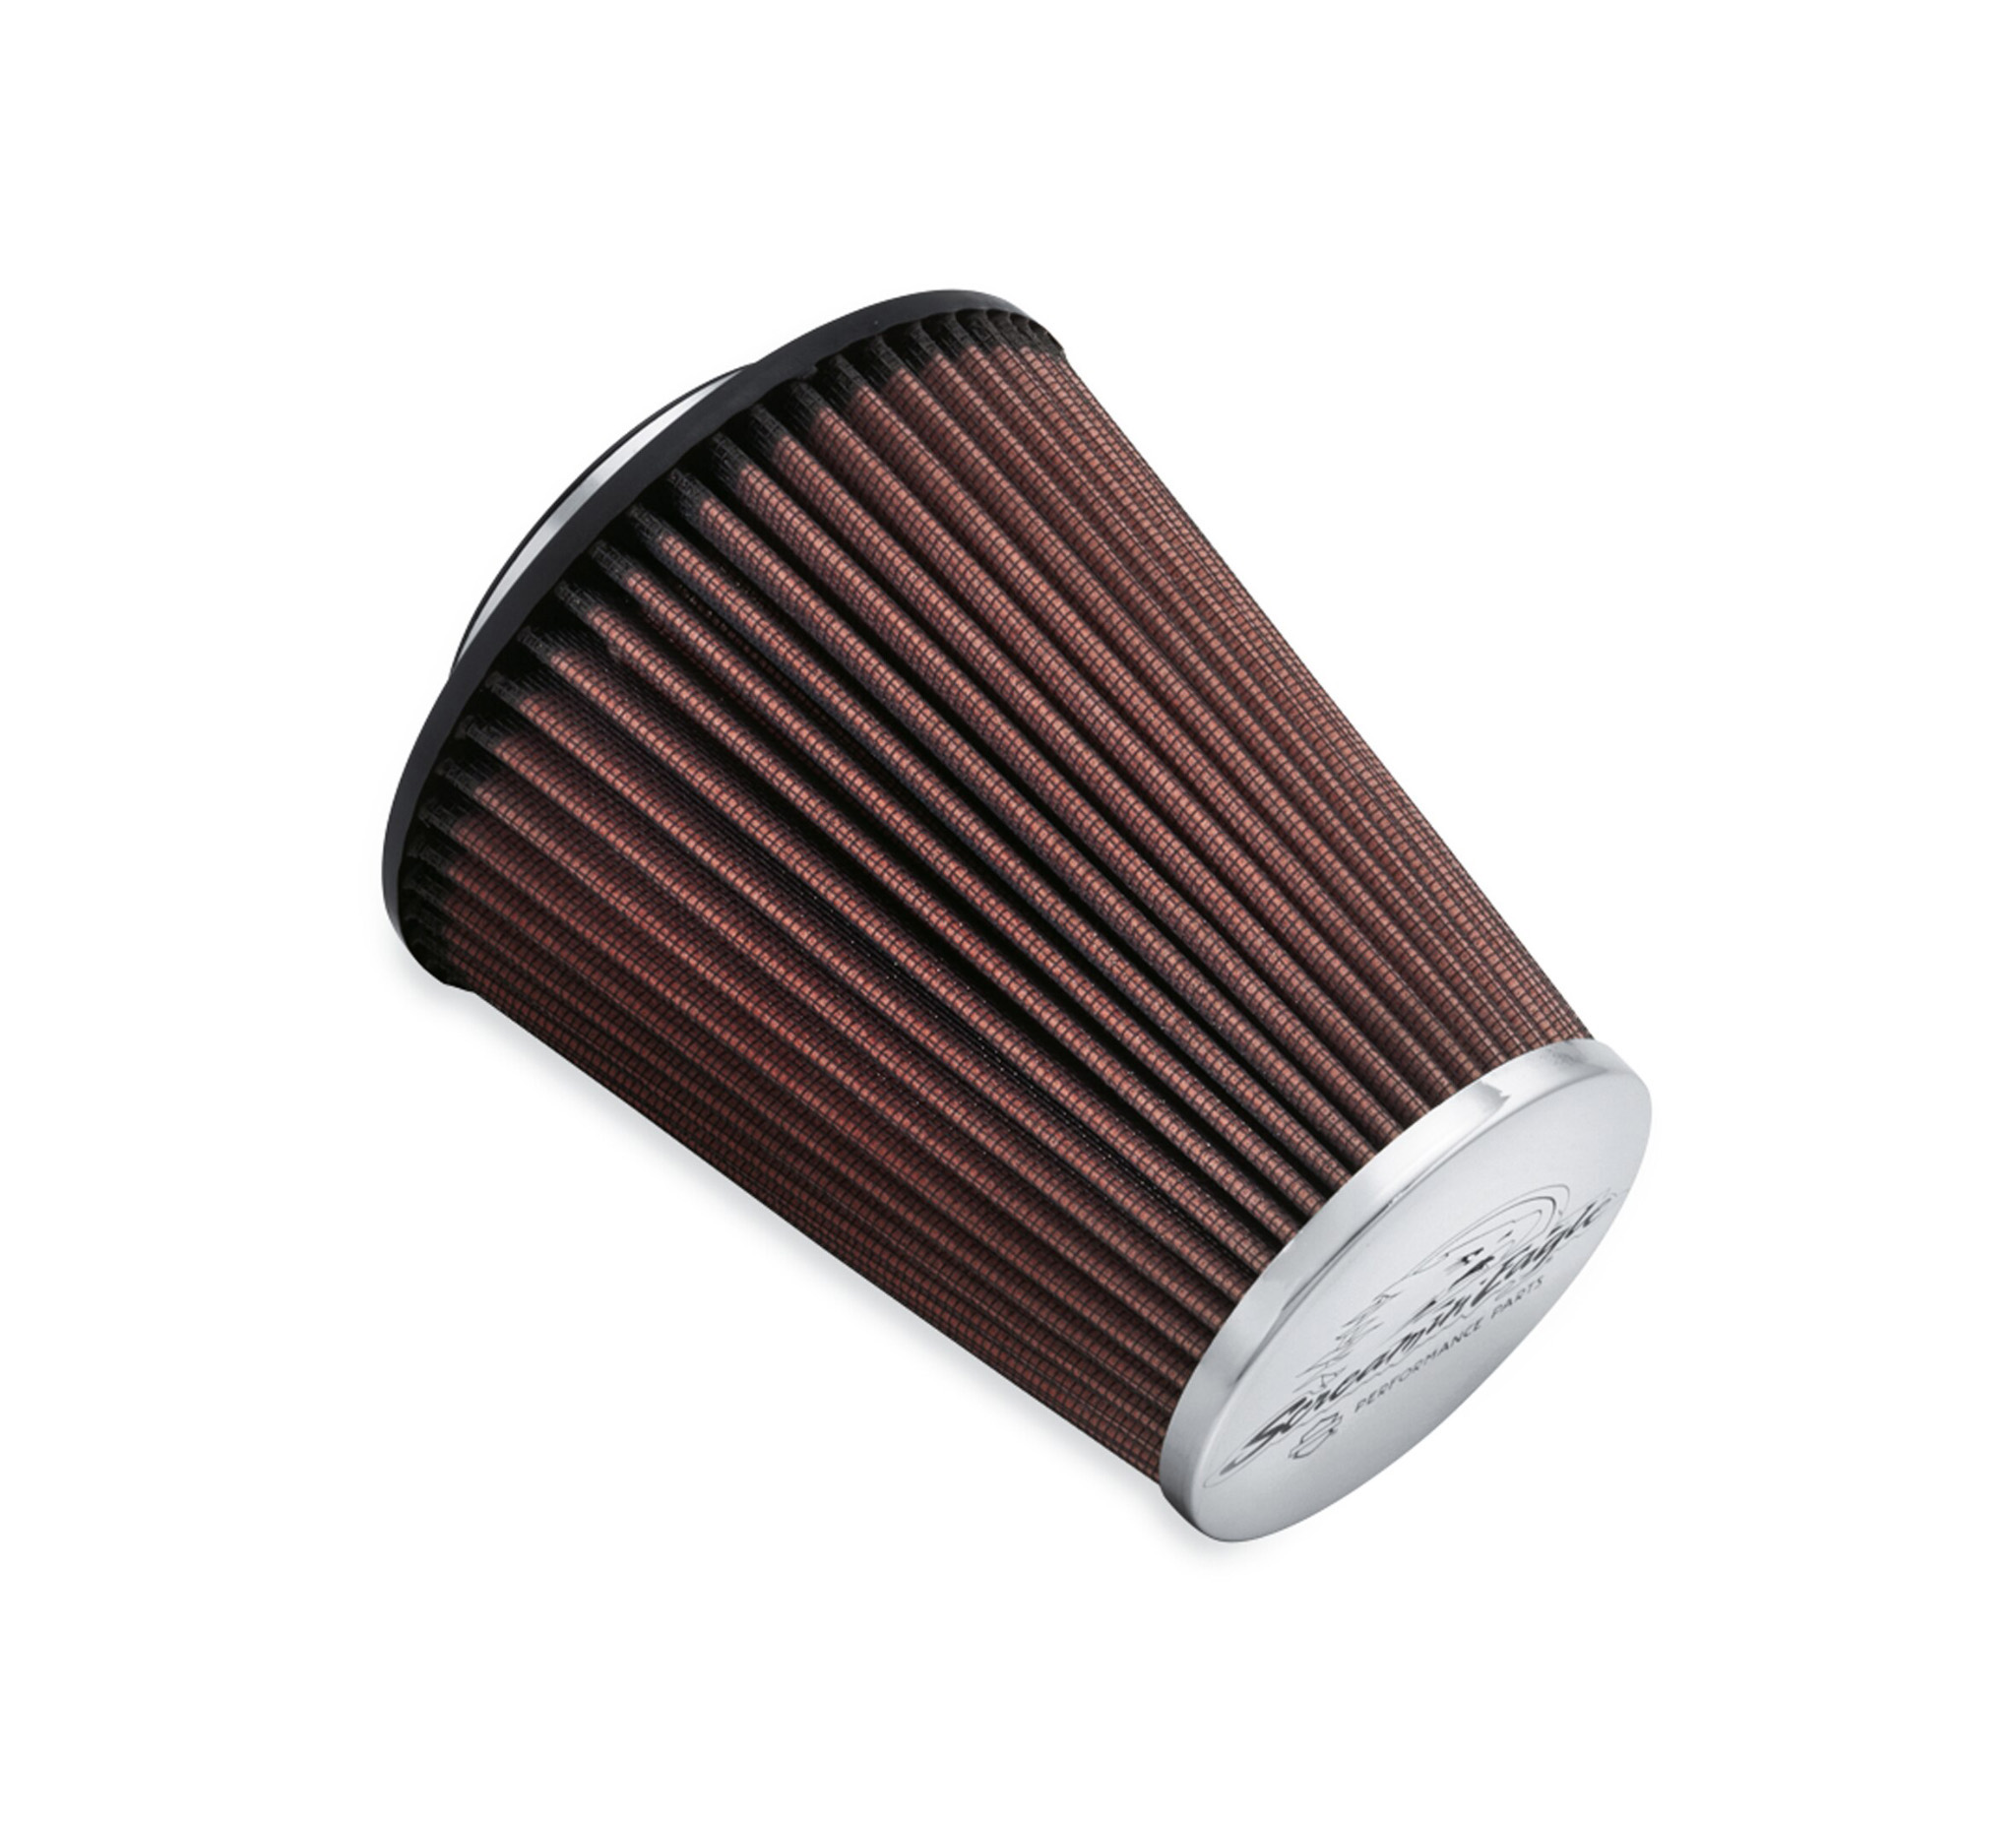 Details about   Motorcycle Air Filters Turbine Air Cleaner Intake Filter For Harley Sportst A4S7